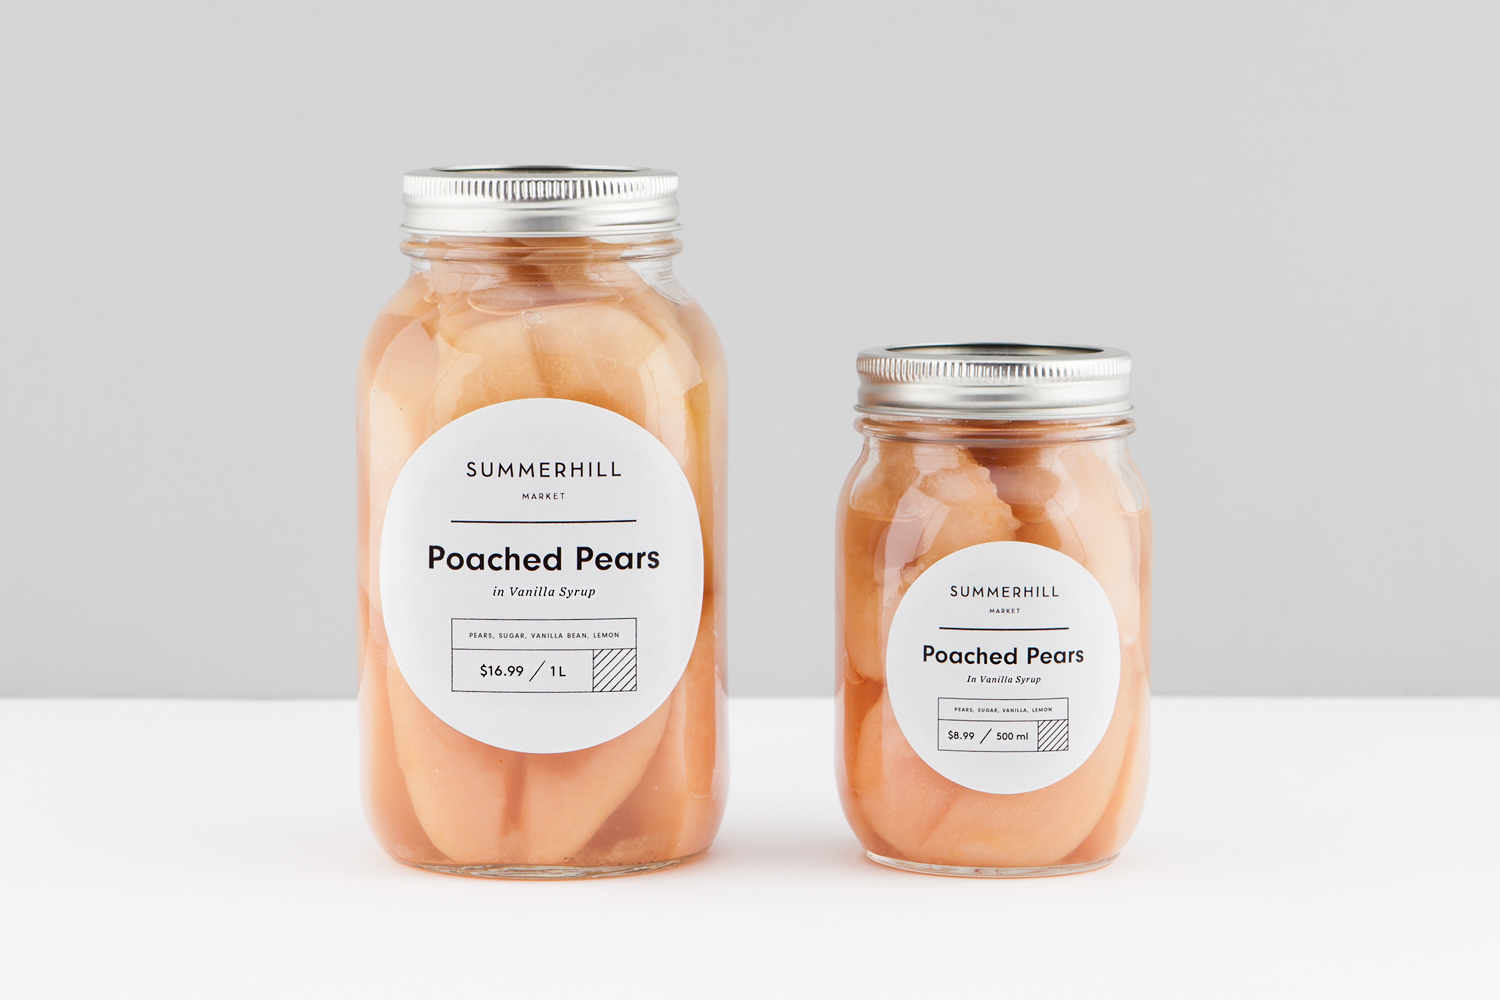 Pear packaging design by Canadian studio Blok for Toronto based boutique grocery store Summerhill Market